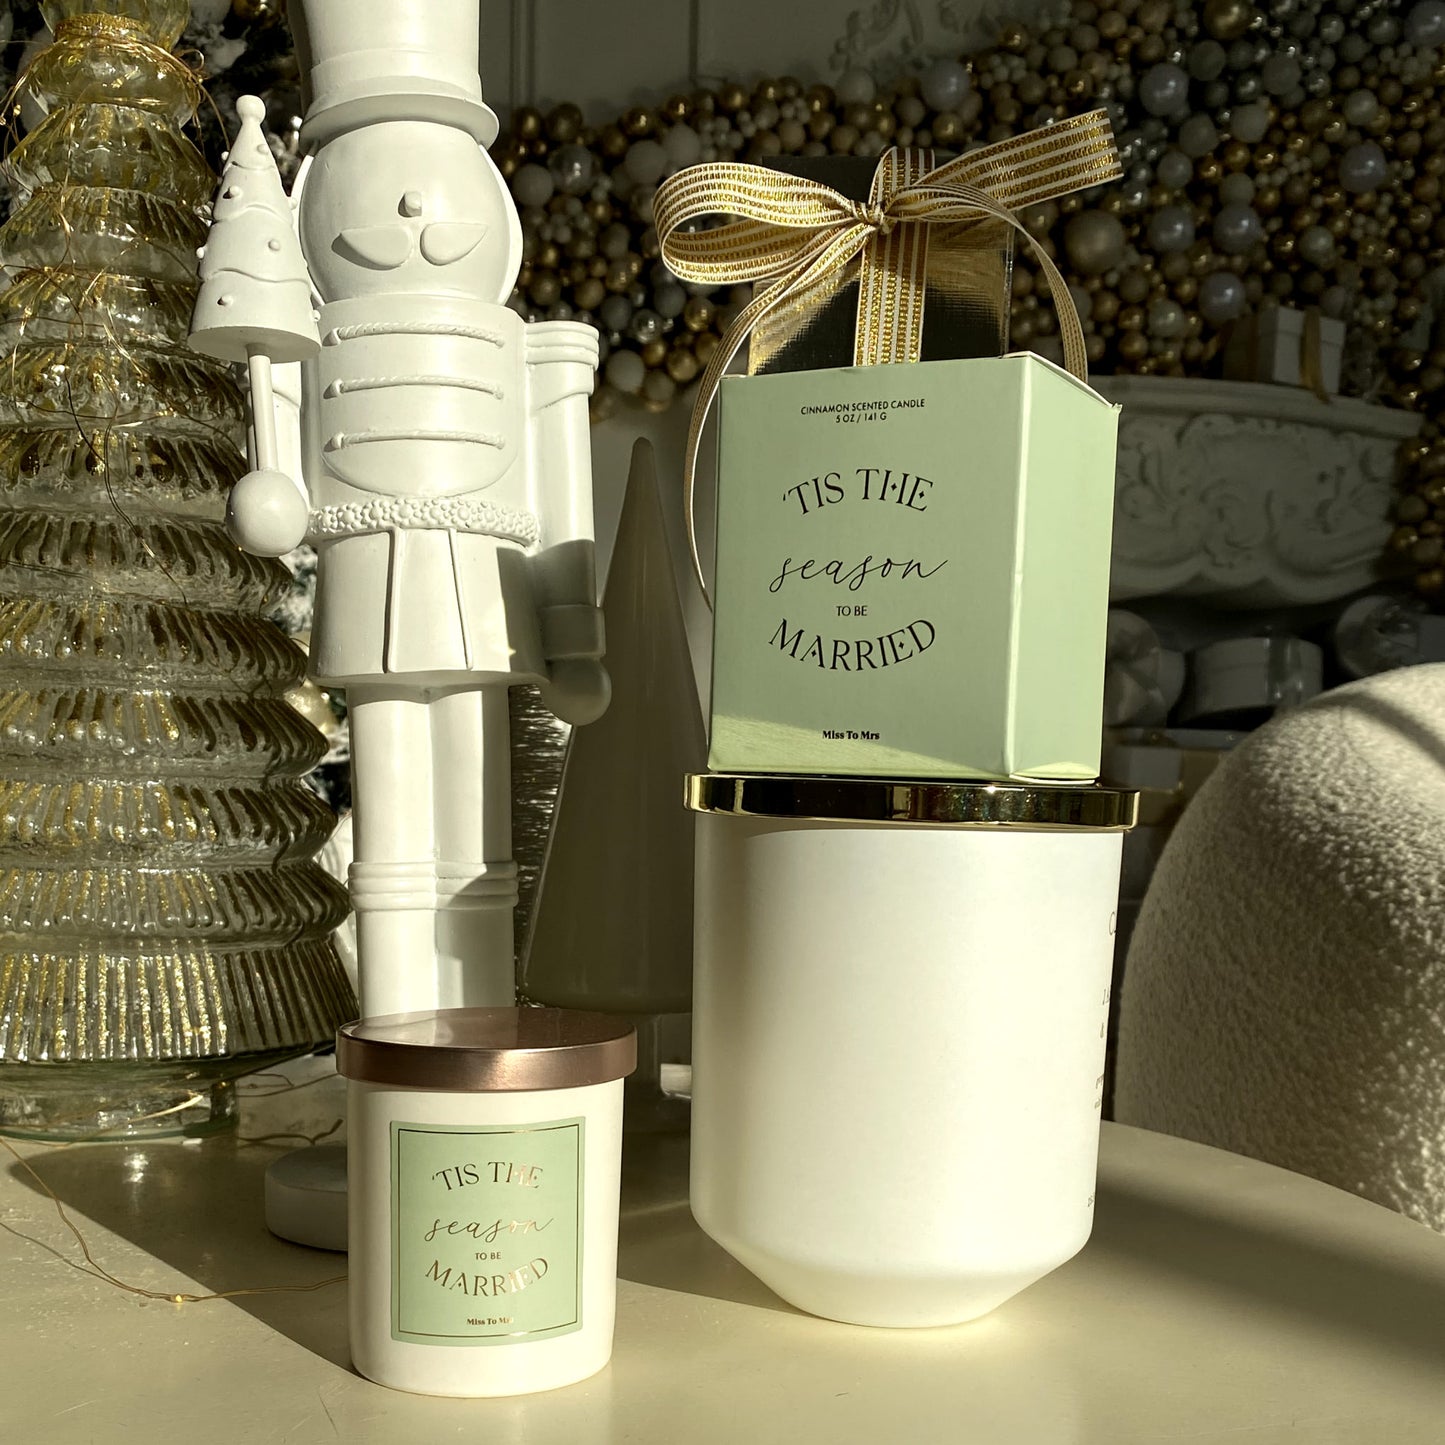 Tis The Season To Be Married Ceramic Soy Wax Cinnamon Scented Candle